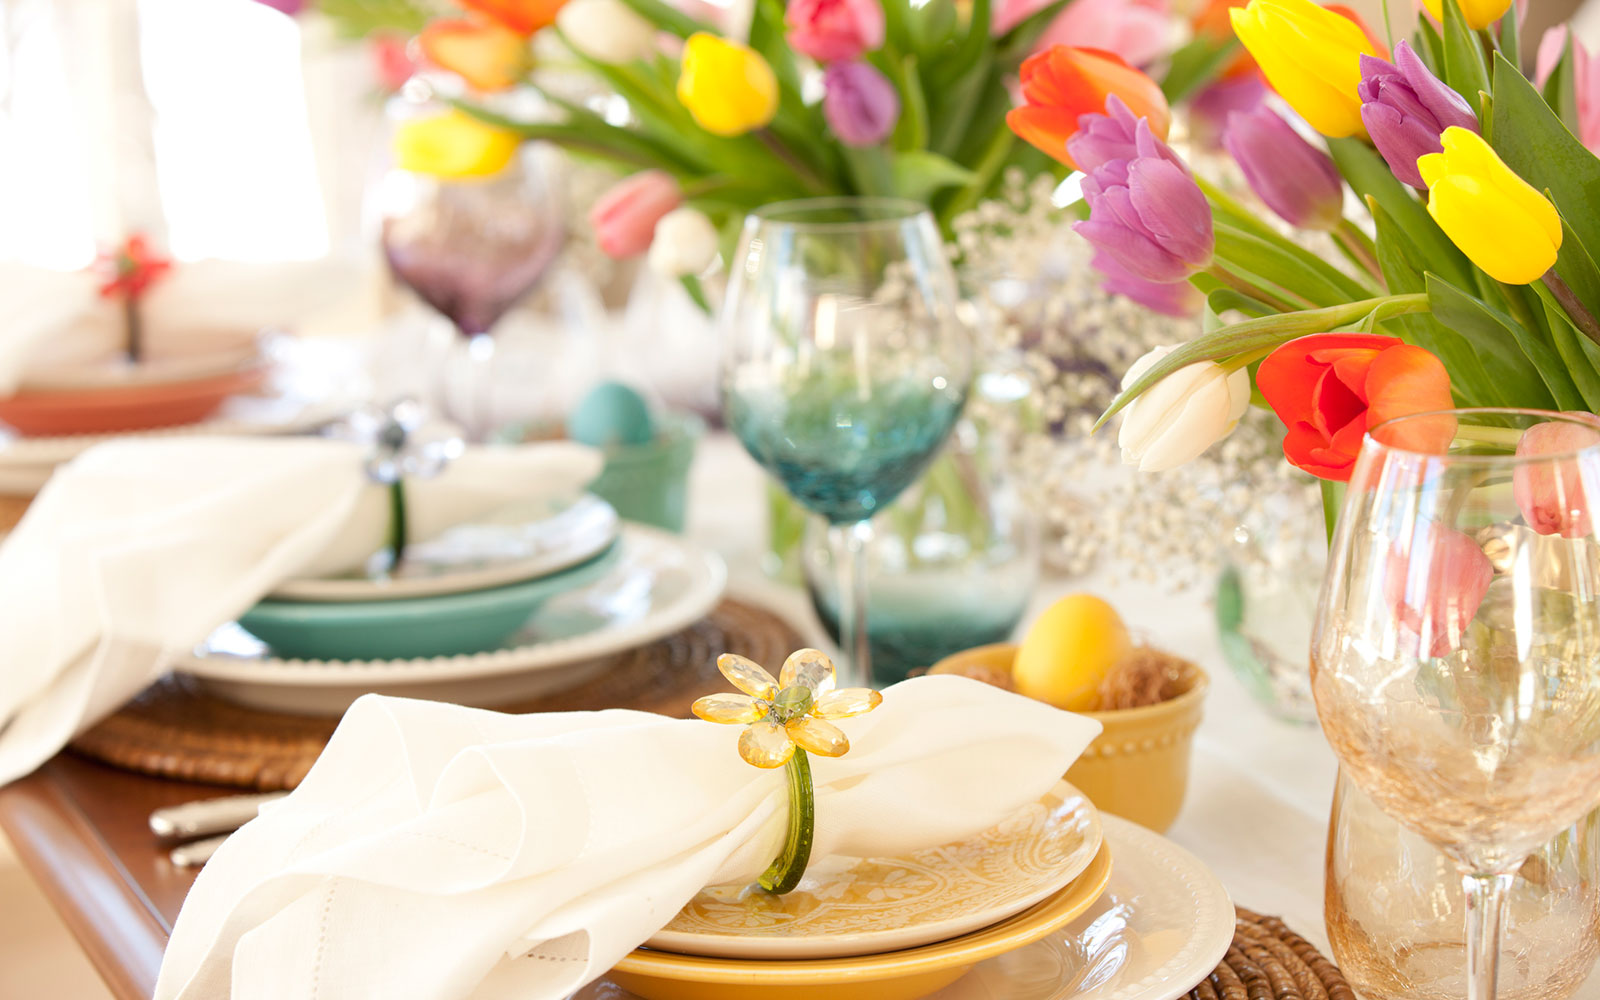 Vegetarian Easter: the recipes for lunch